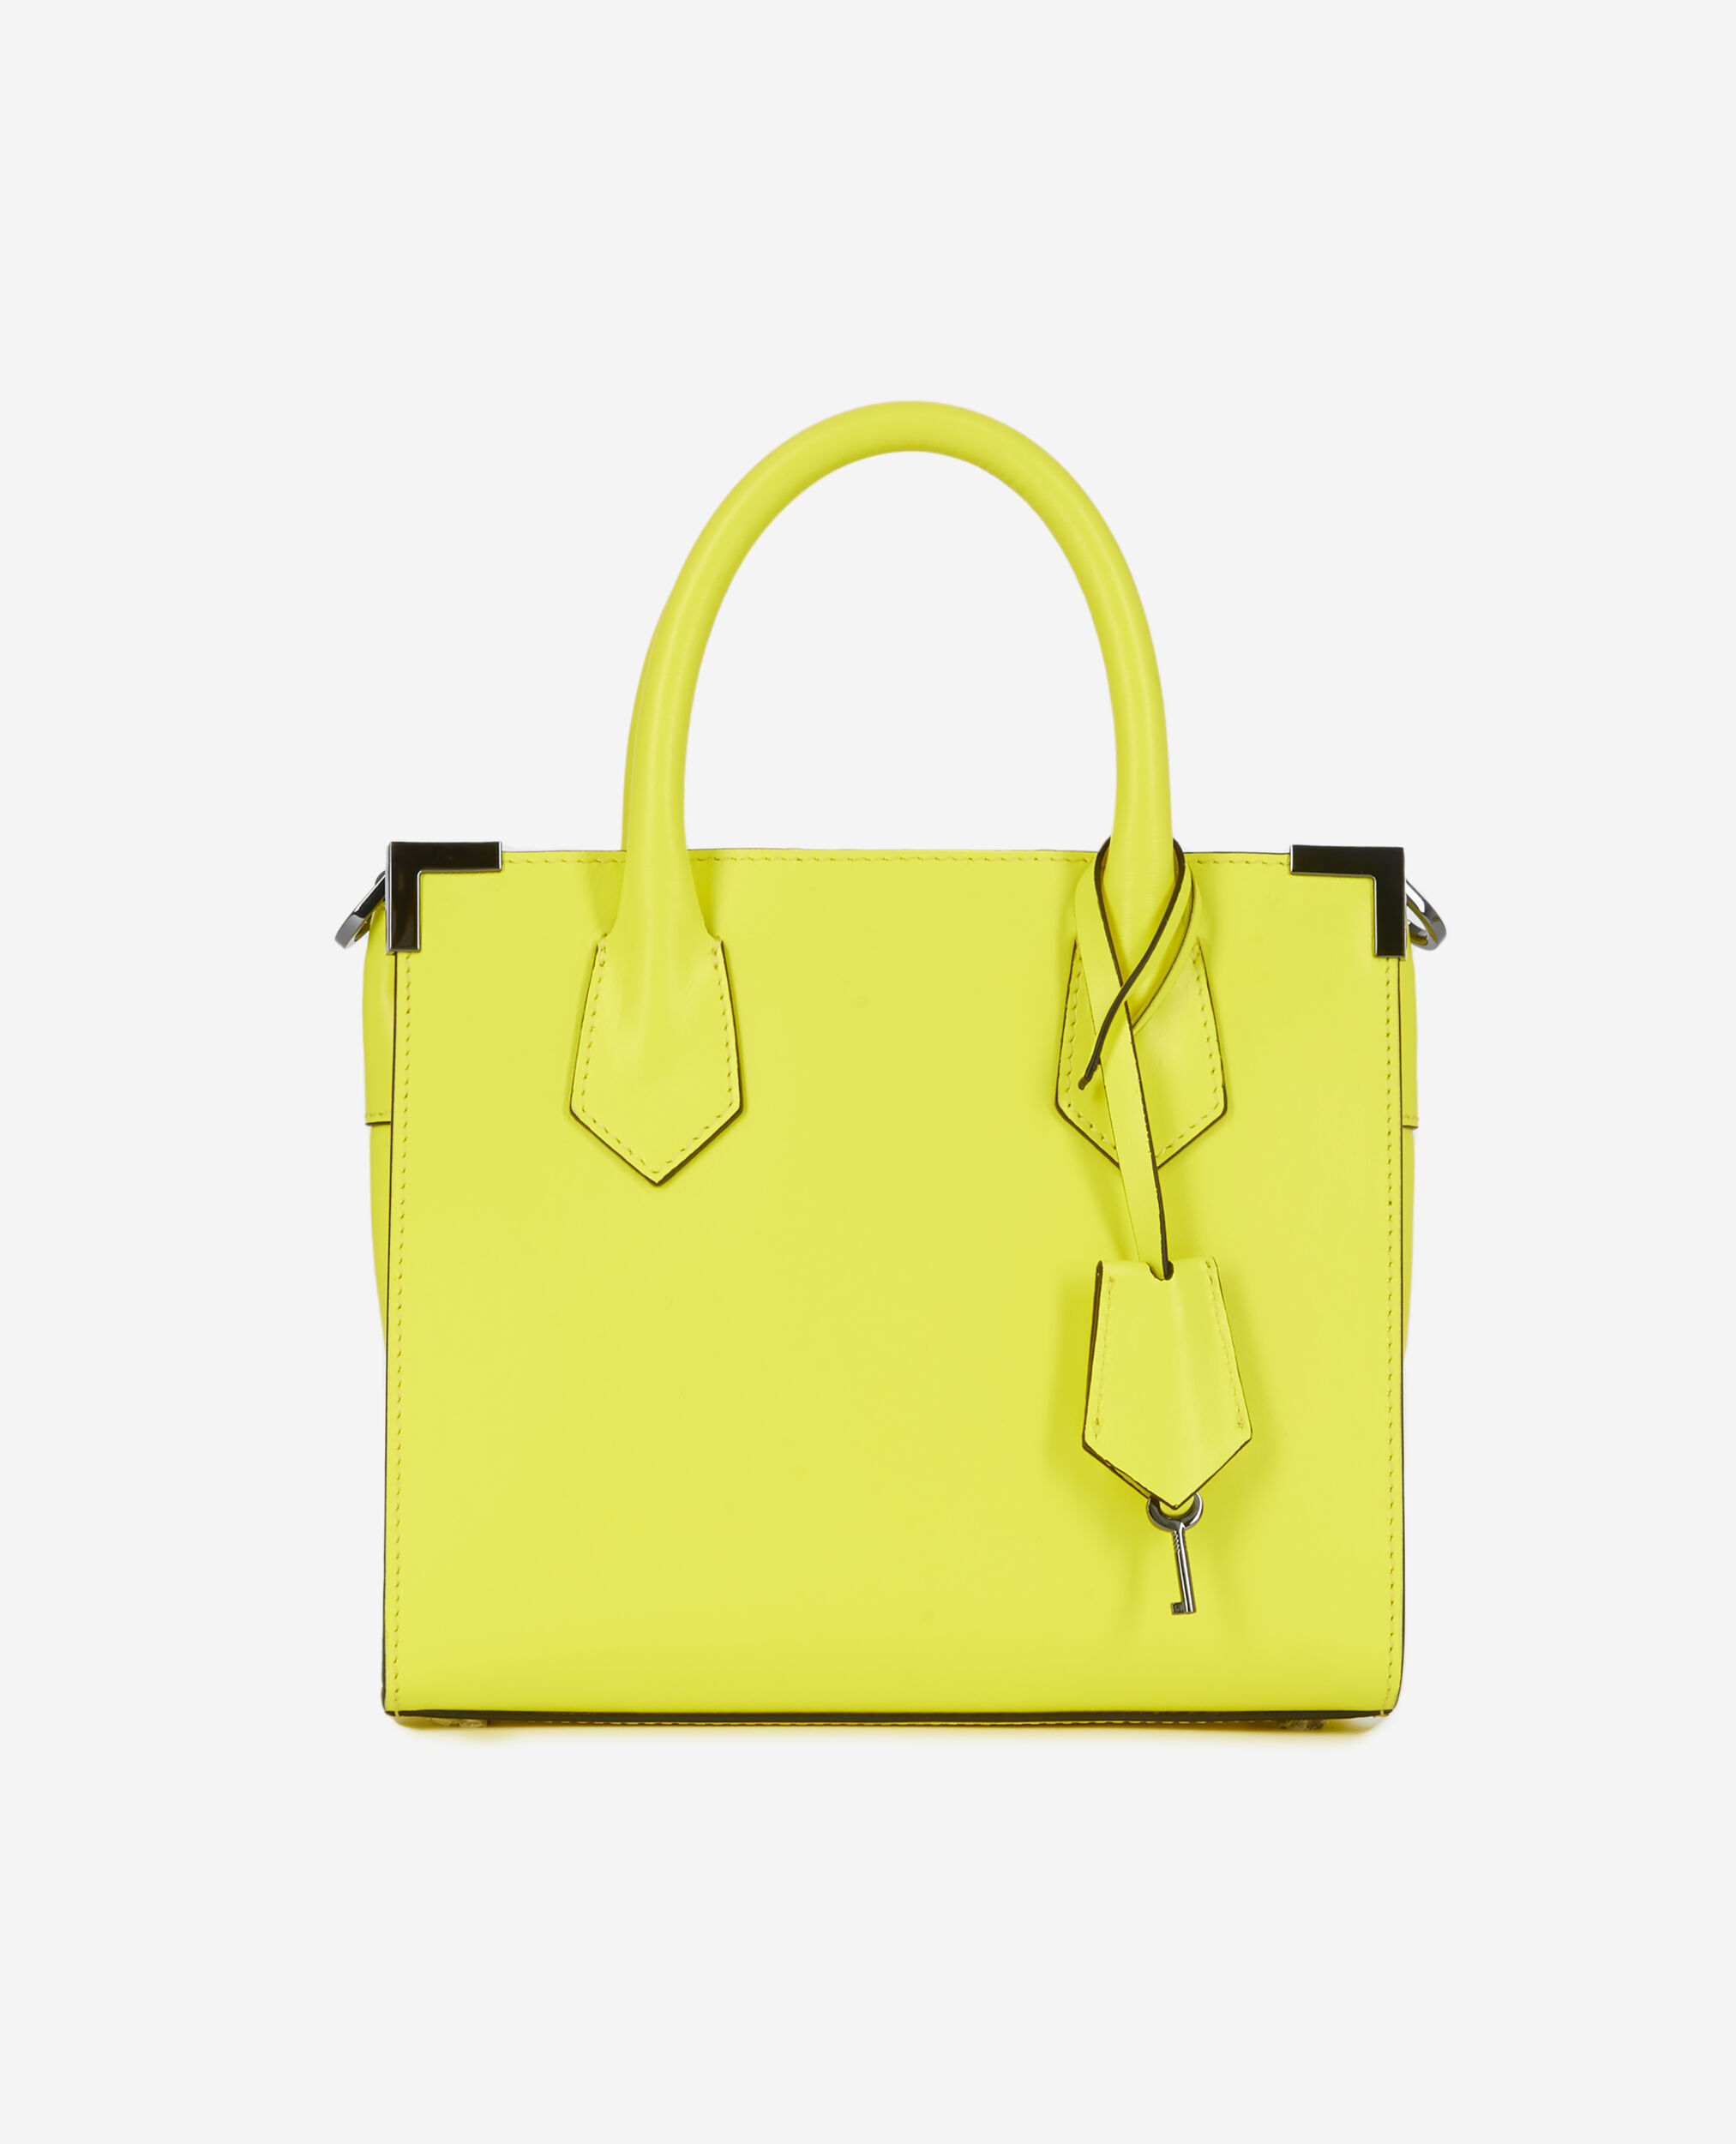 Medium Ming bag in yellow leather, YELLOW ACID, hi-res image number null